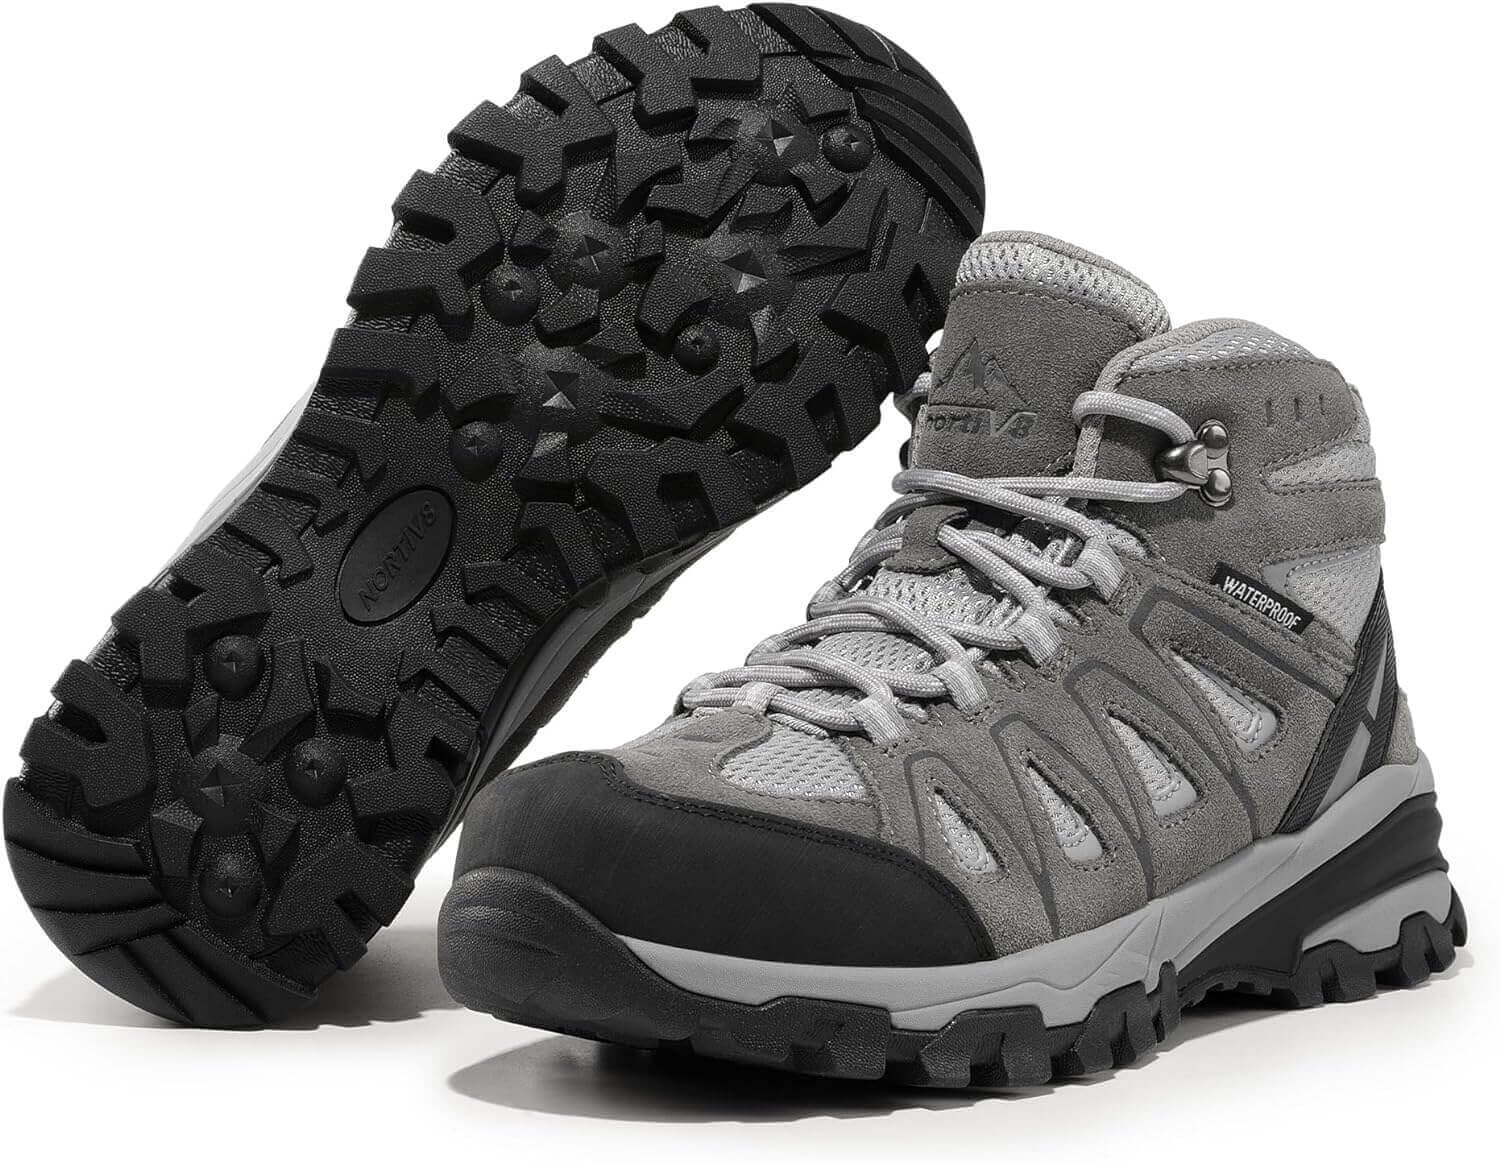 Shop The Latest >NORTIV 8 Women's Waterproof Trail Hiking Boots > *Only $69.99*> From The Top Brand > *NORTIV 8l* > Shop Now and Get Free Shipping On Orders Over $45.00 >*Shop Earth Foot*